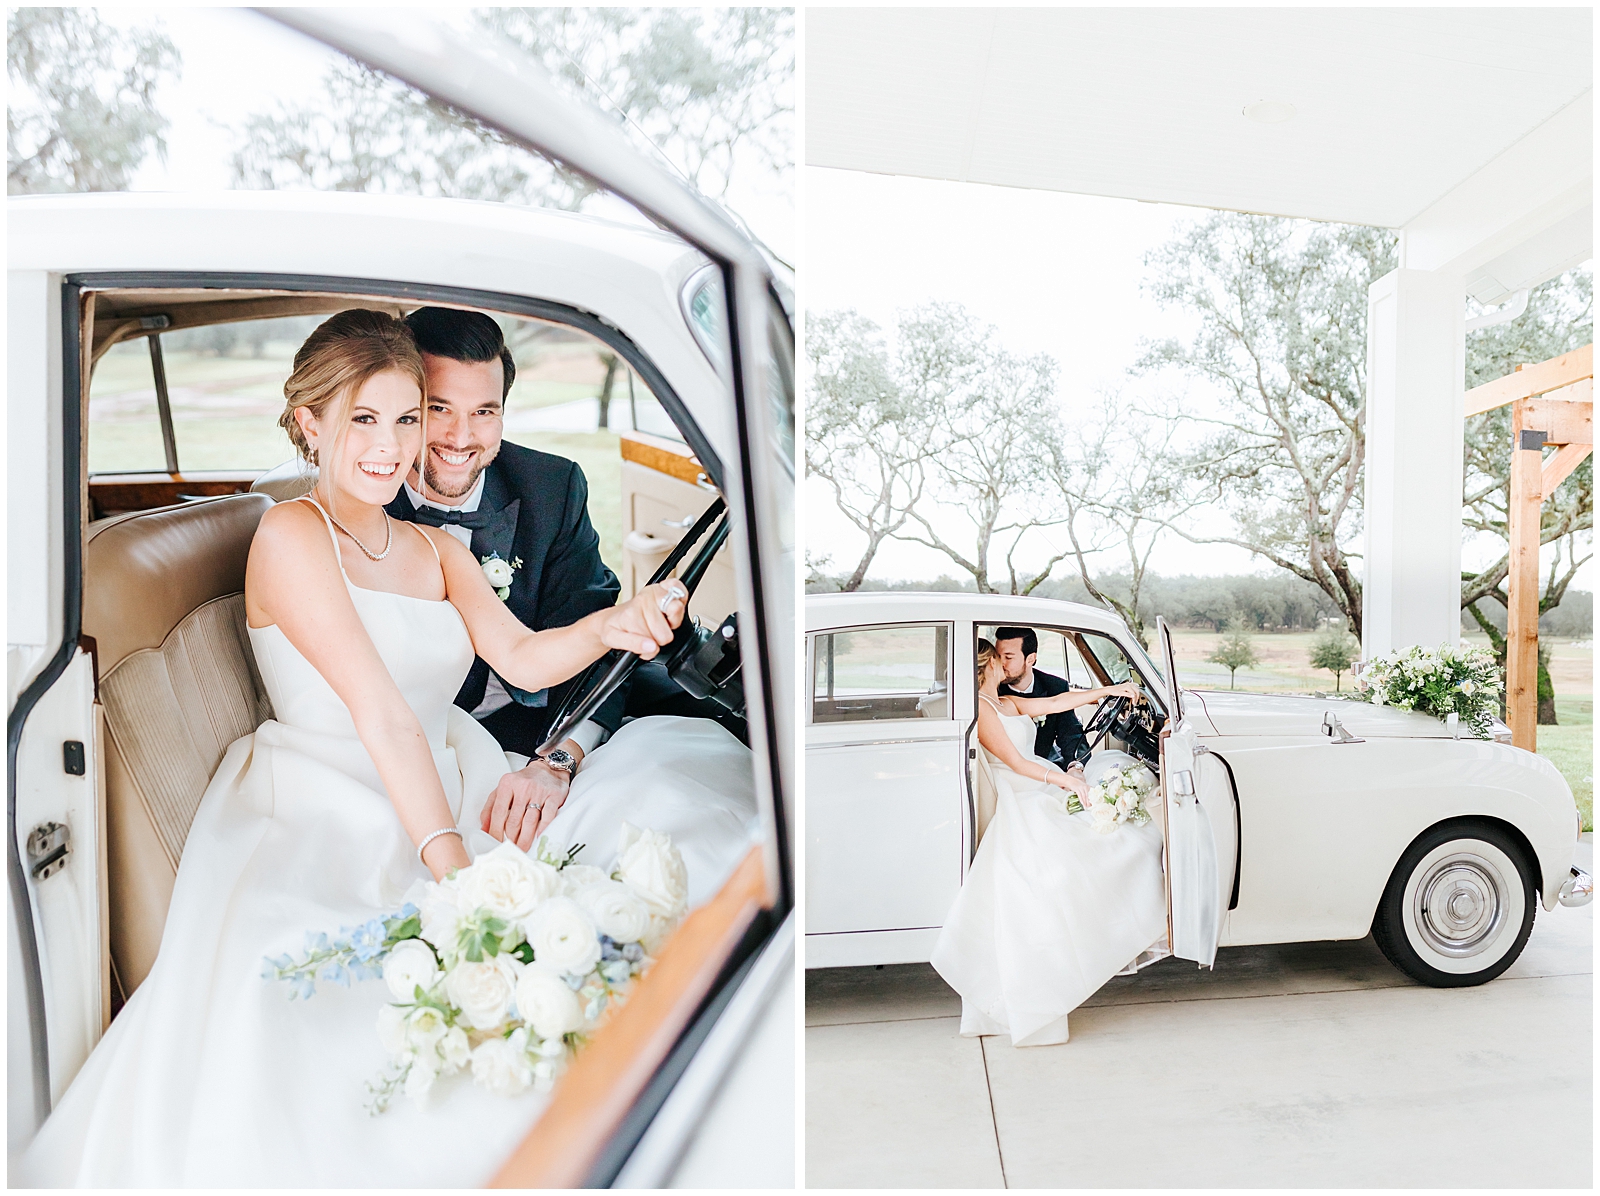 Happy couple at Classic Elegant Florida Wedding - 1961 Rolls Royce White with floral installation